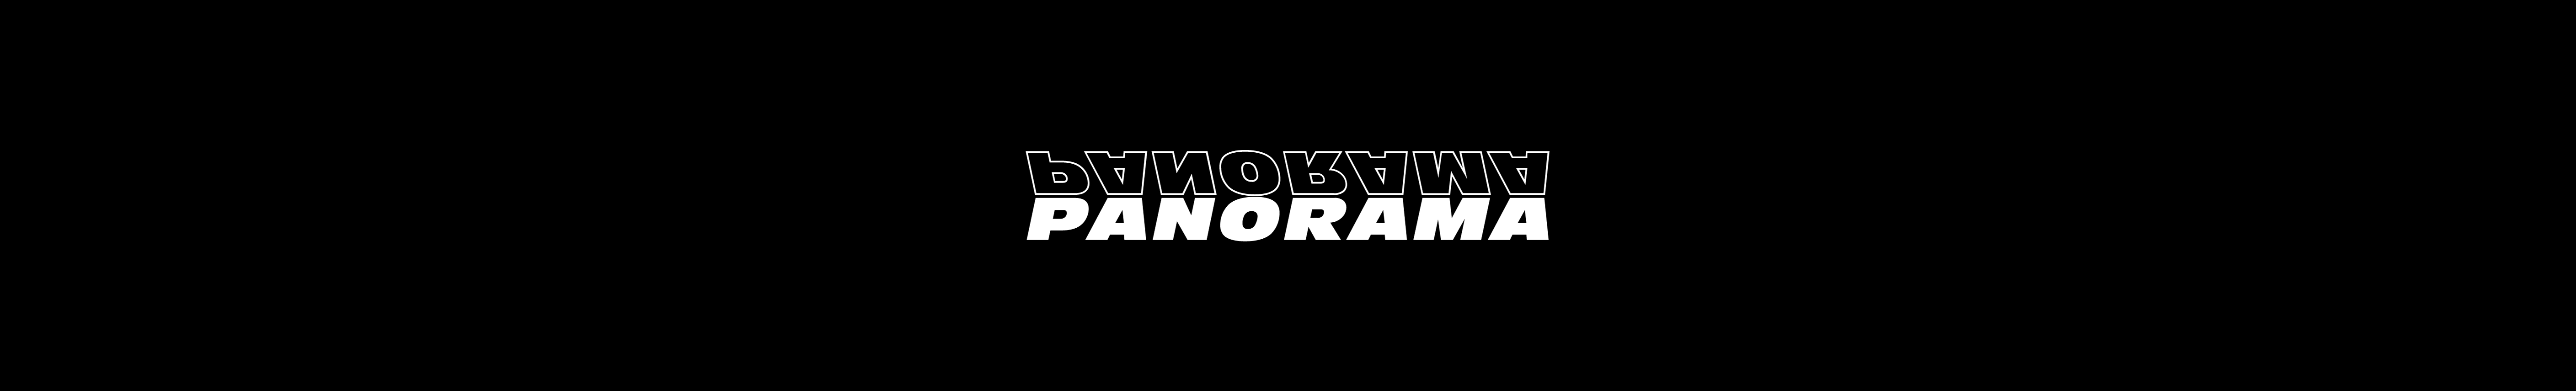 Panorama Works's profile banner